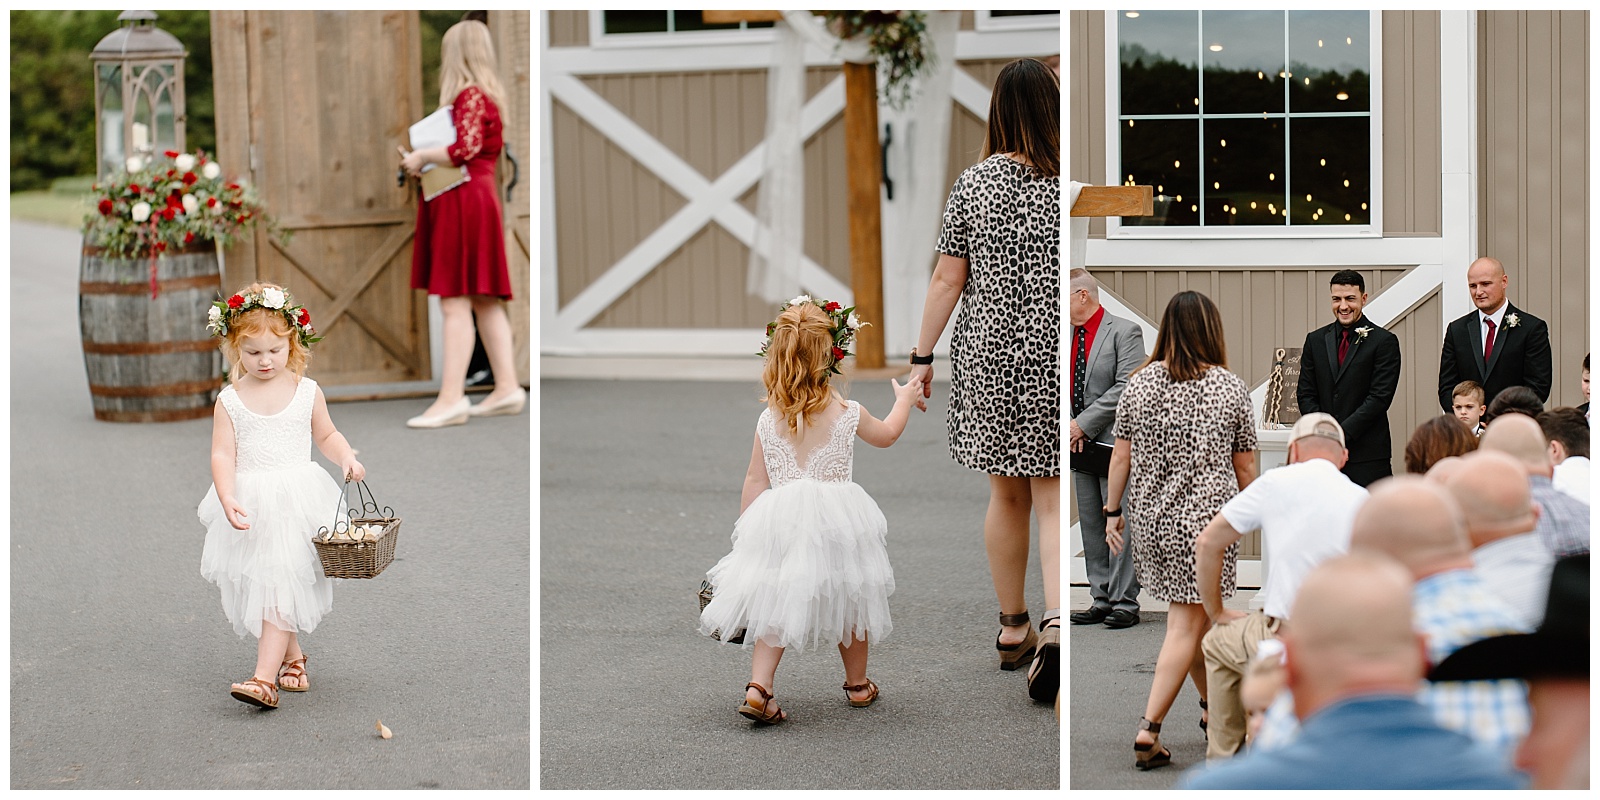 Redheaded young flower girl with tulle skirt throws white rose pedals as she walks down the aisle, gets nervous, and asks her mom to hold her hand.